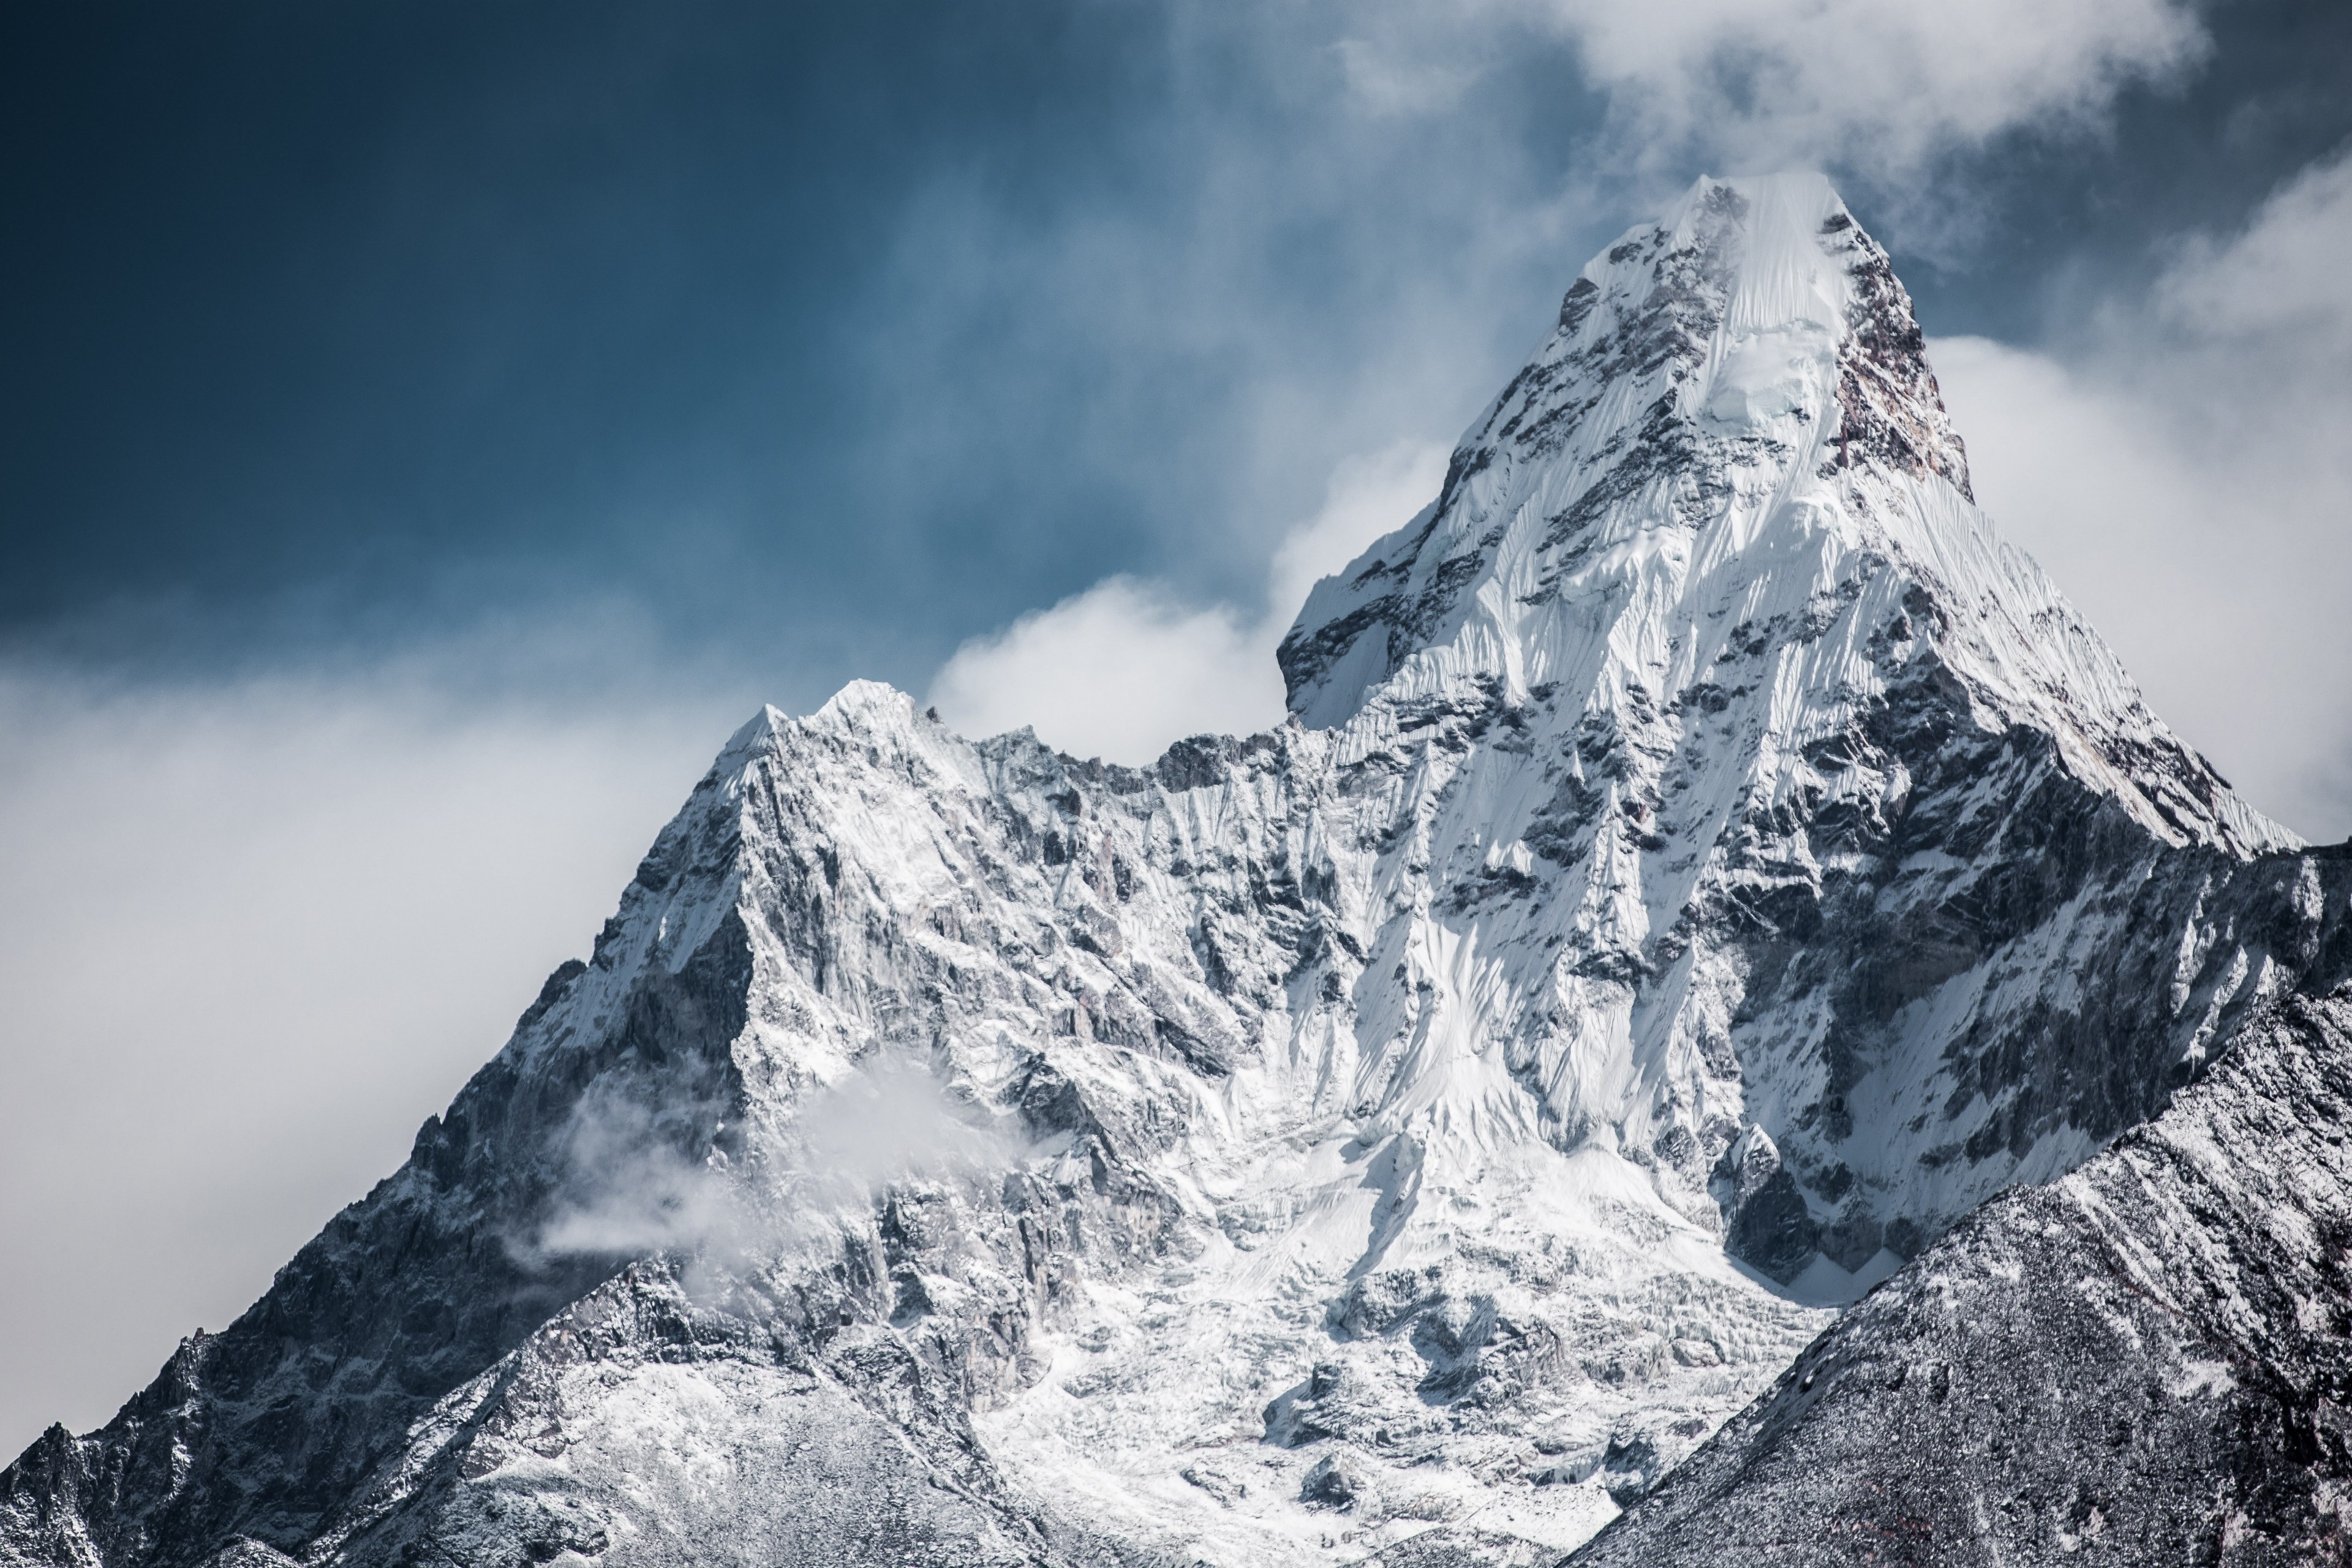 Wallpaper / view from mount everest base camp on the mighty summit, distant peaks 4k wallpaper free download